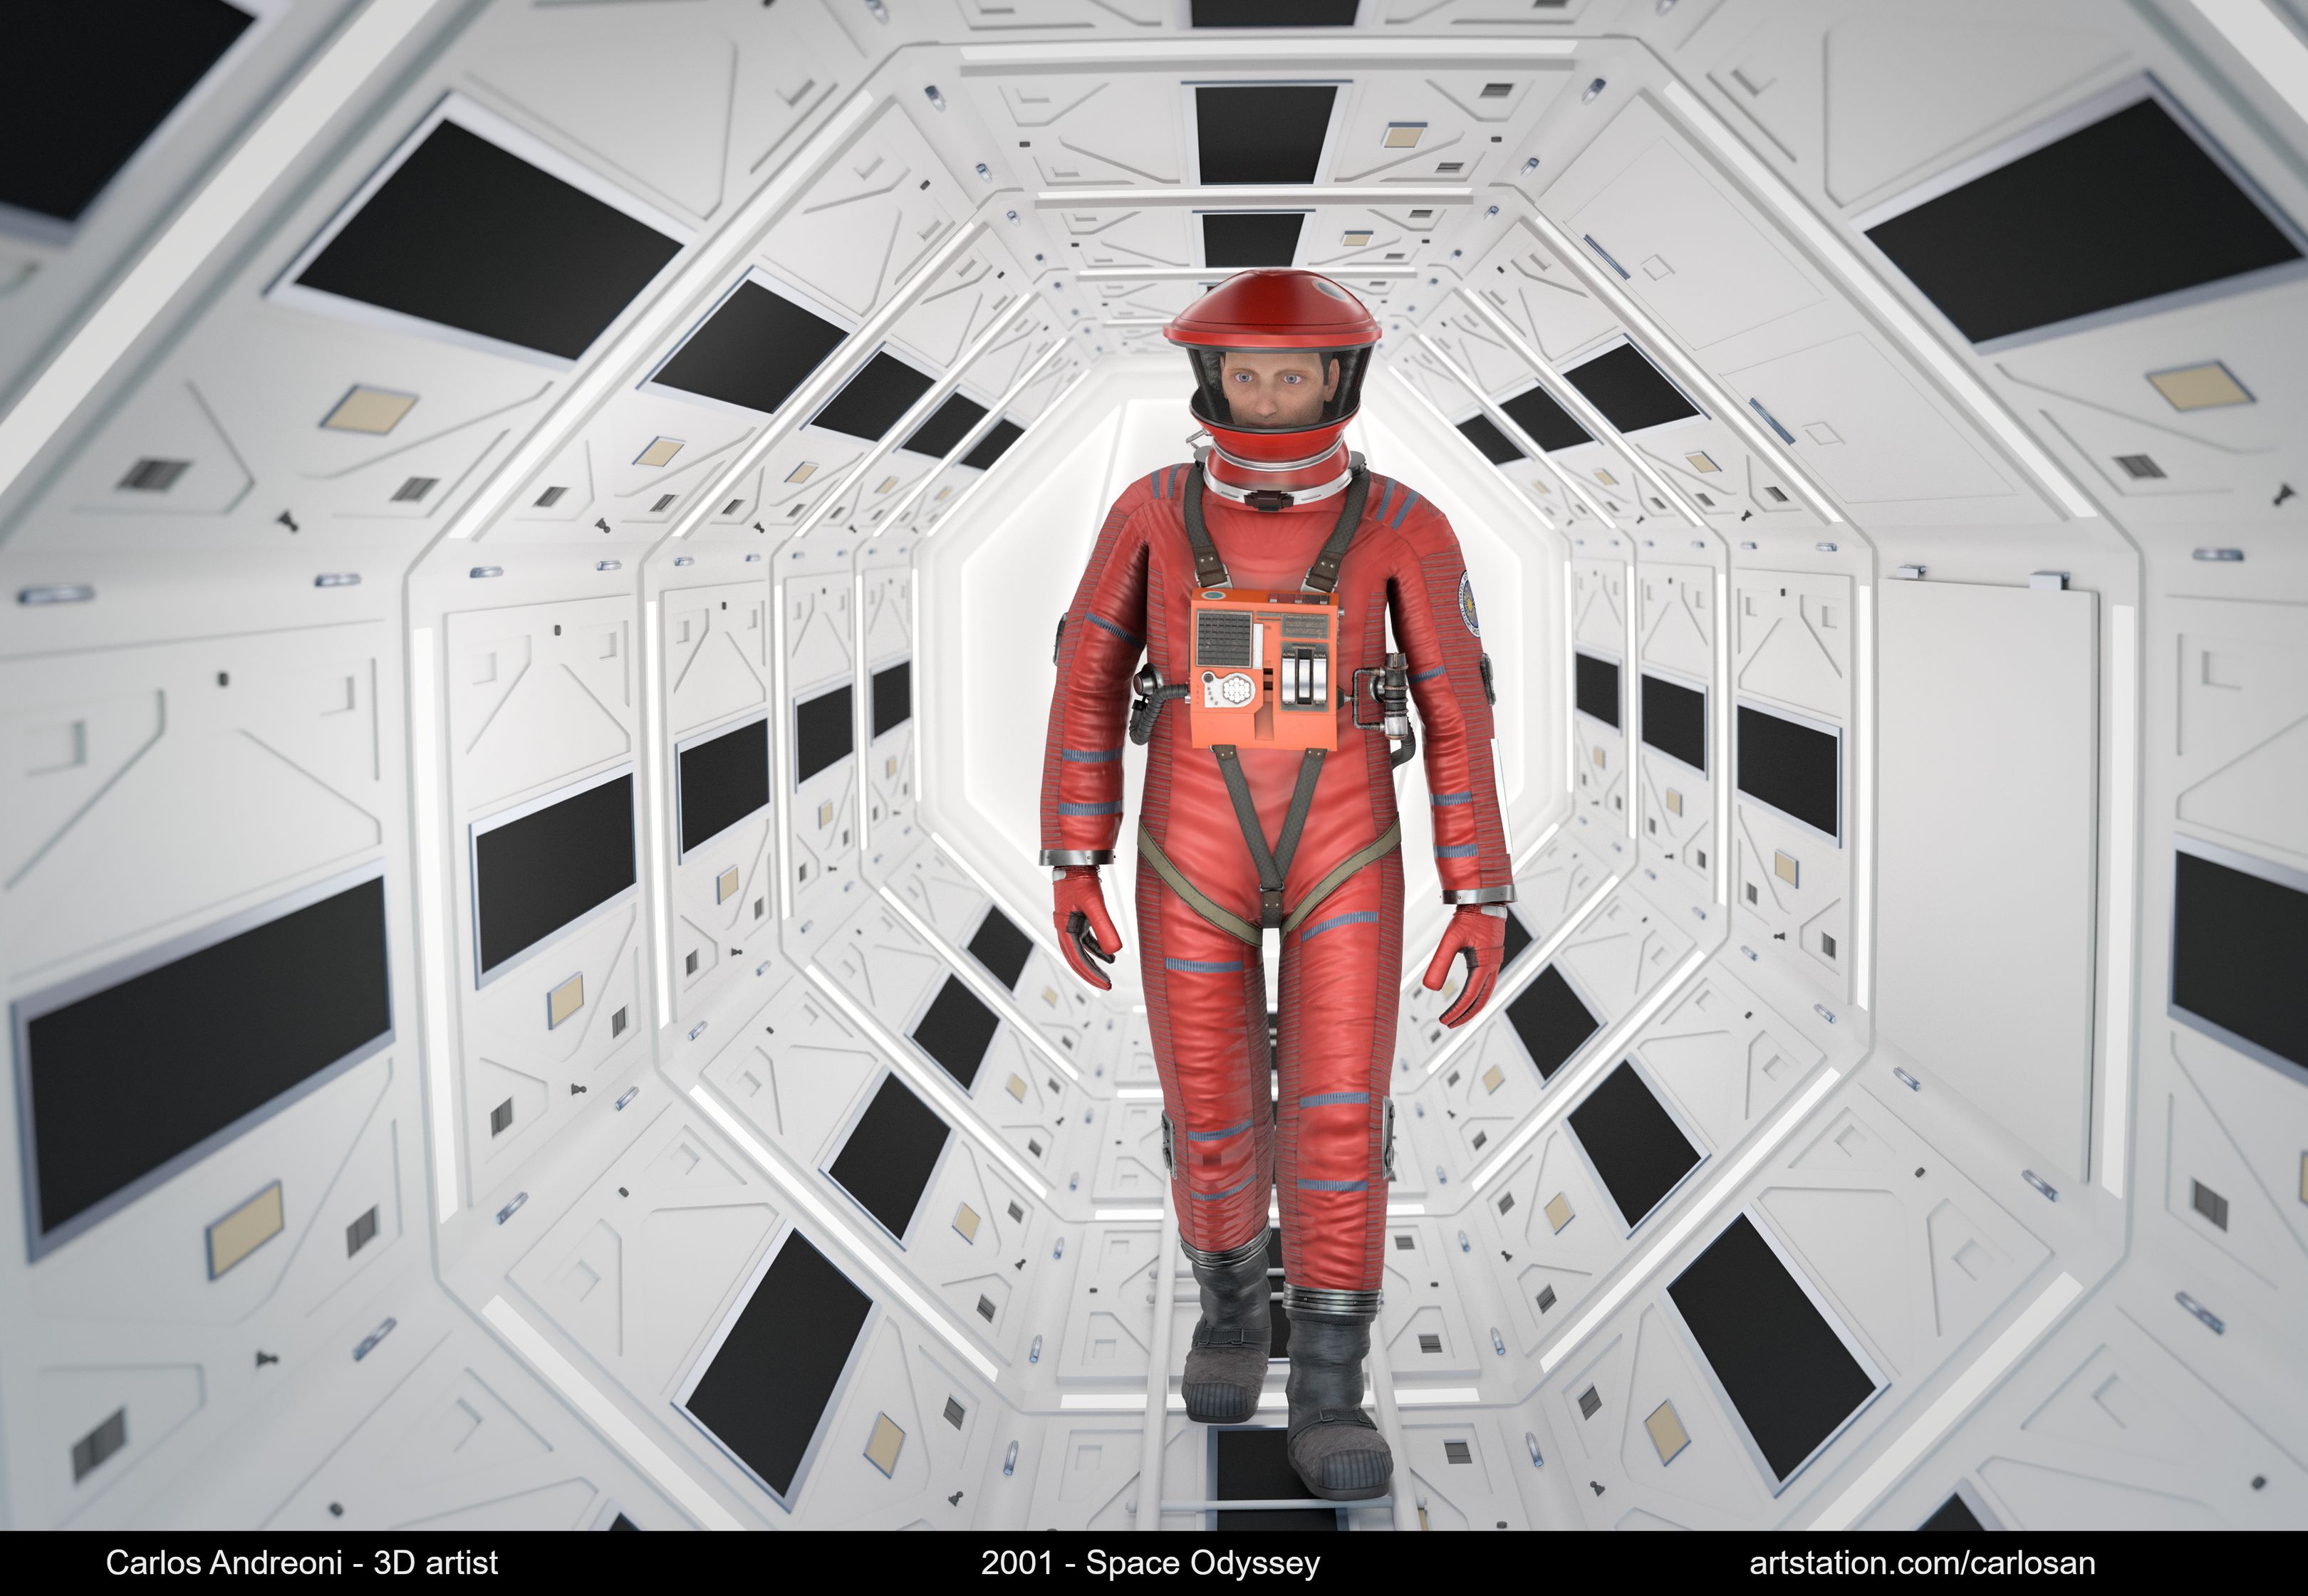 2001: A Space Odyssey - Finished Projects - Blender Artists Community